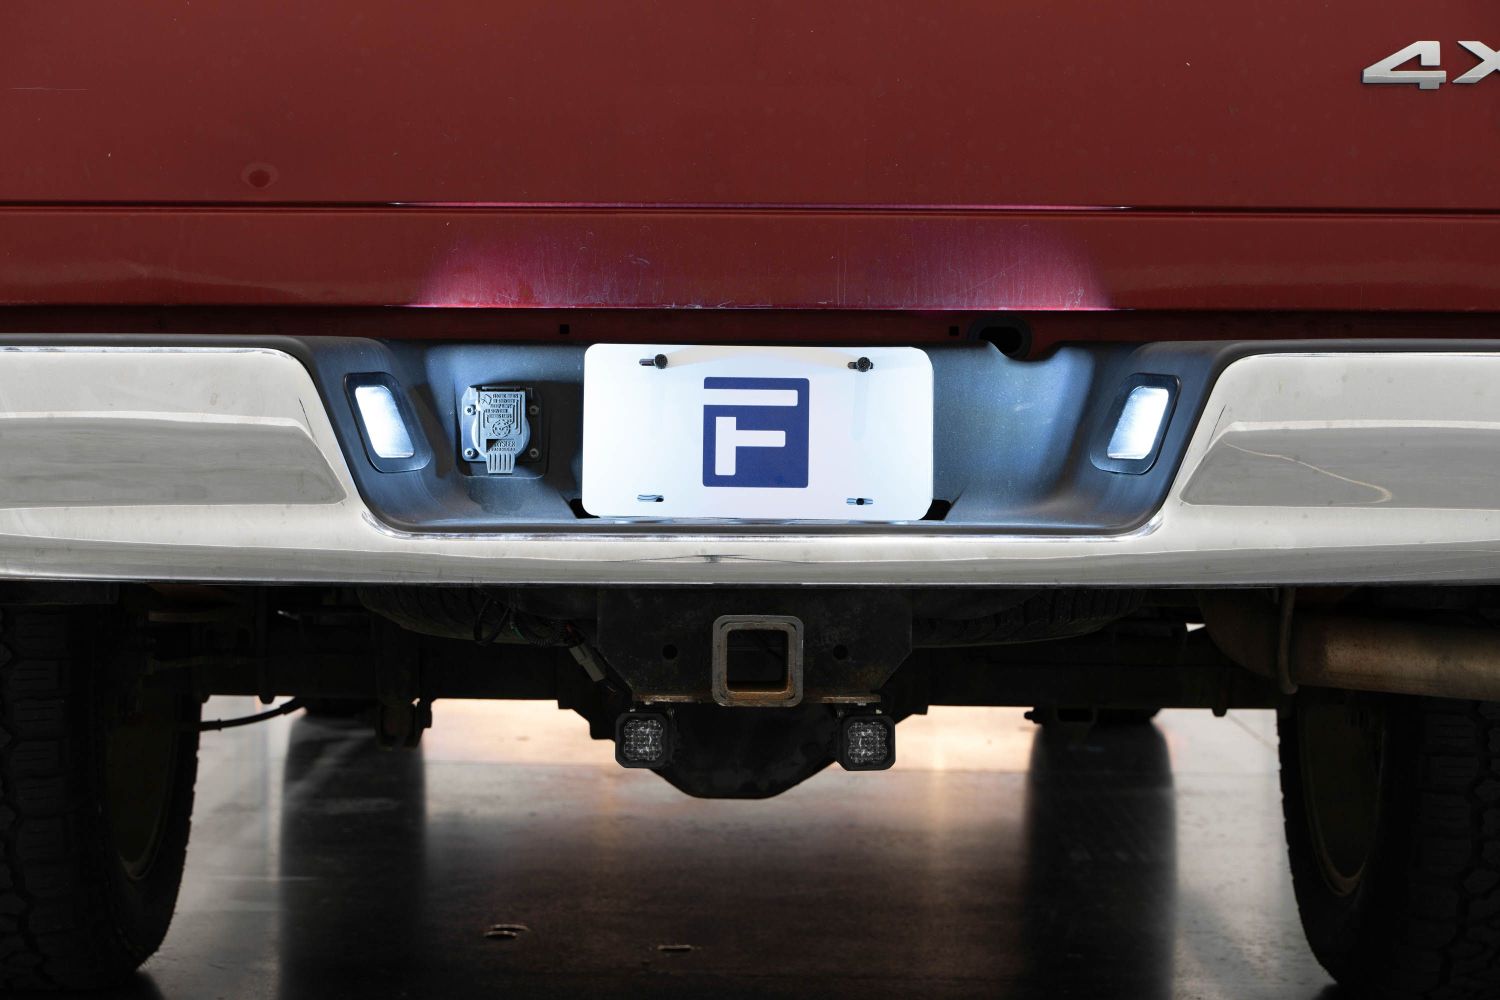 How to Install: Form Lighting LED License Plate Lights